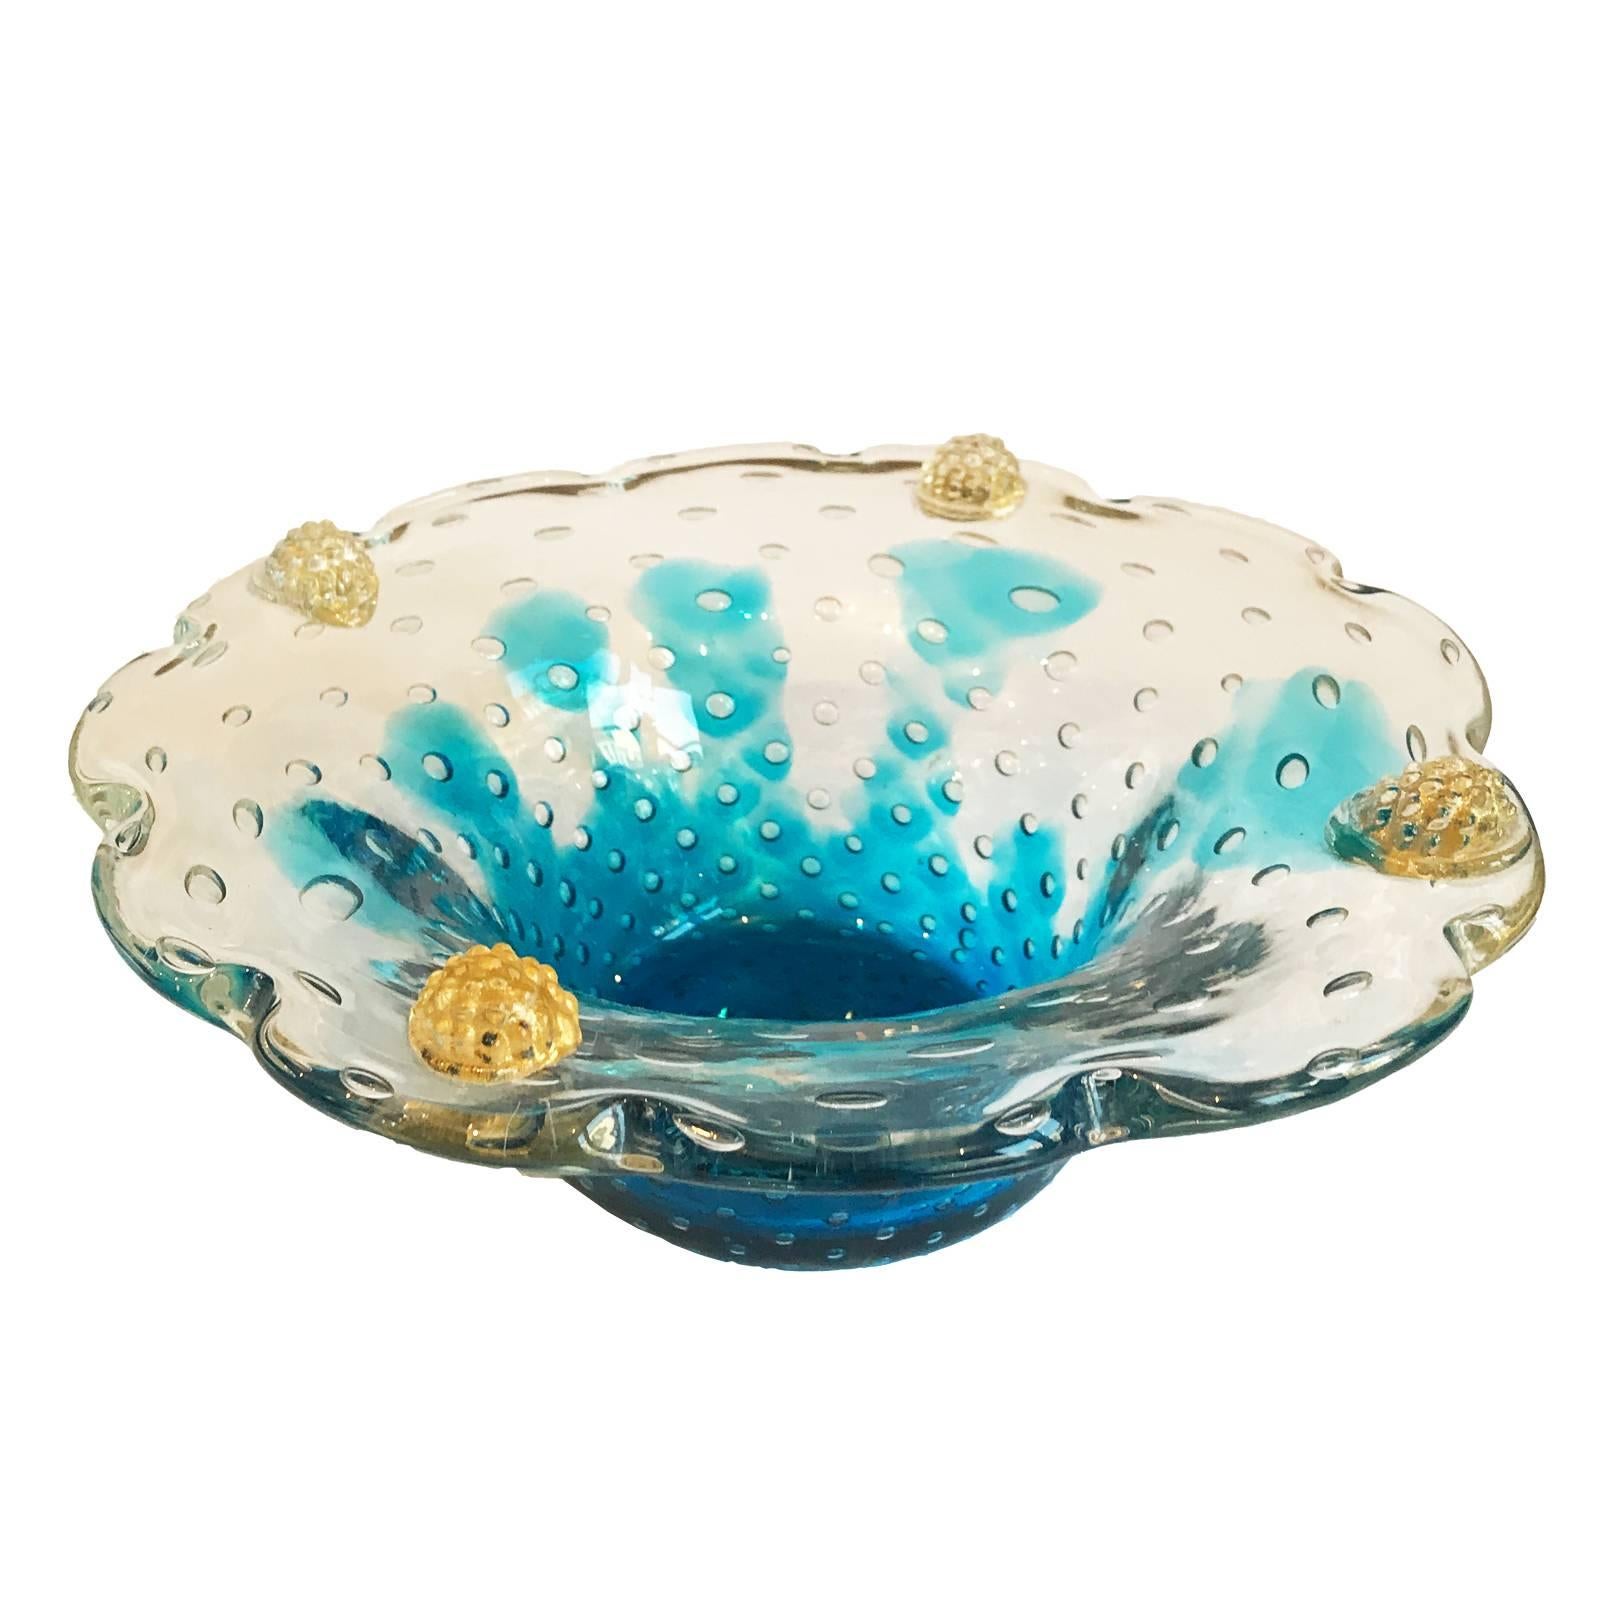 Stunning Murano centrepiece made of thick clear glass with aquamarine tones at the base. Controlled air bubbles (pulighe) are imbedded within the vitreous walls. Four applied ornaments impressed onto the glass feature embedded gold flecks and were